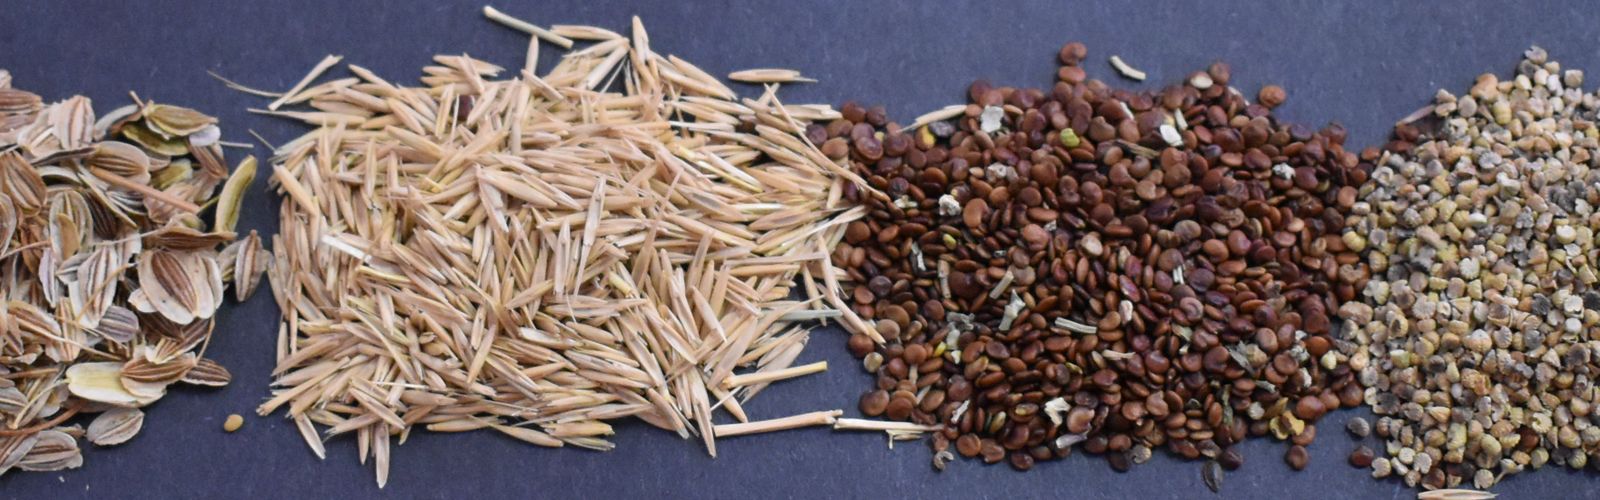 A row of 6 different kinds of seeds in small piles on a blue surface.